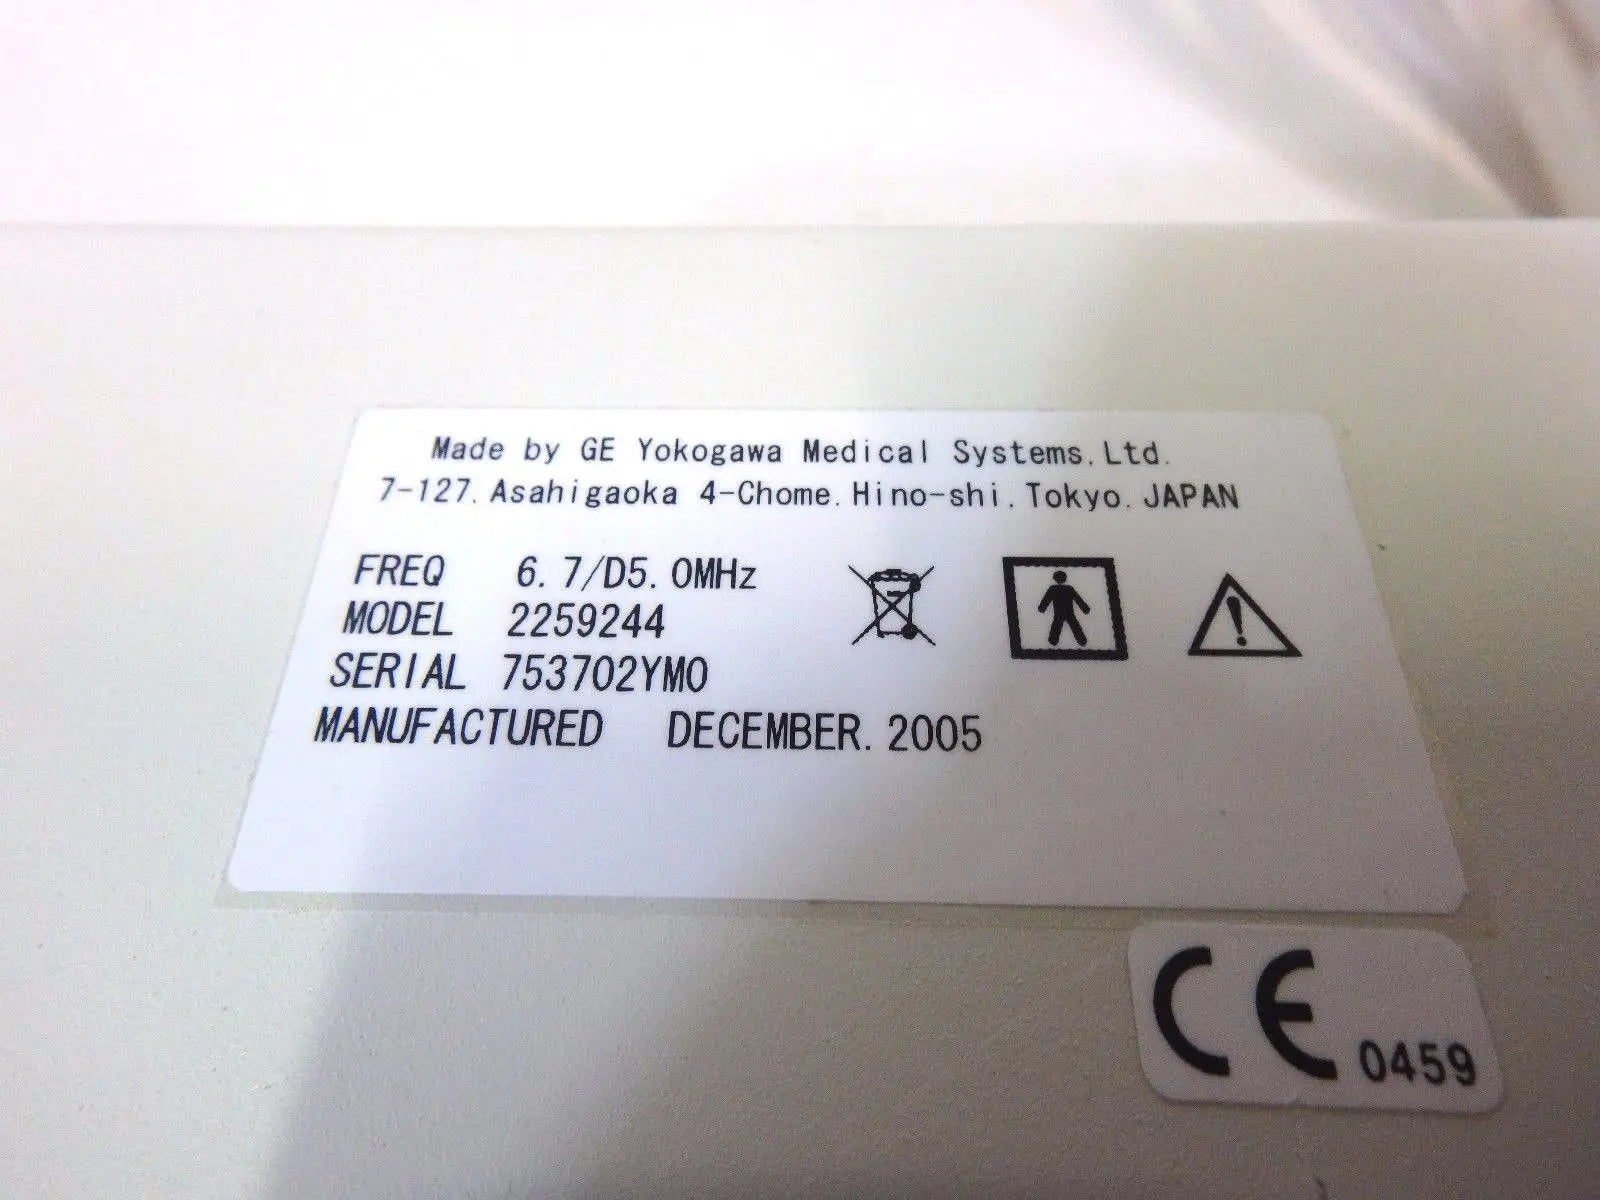 GE T739 Intraoperative 6.7/D5 0MHz Ultrasound Transducer Probe 2259244 Medical DIAGNOSTIC ULTRASOUND MACHINES FOR SALE